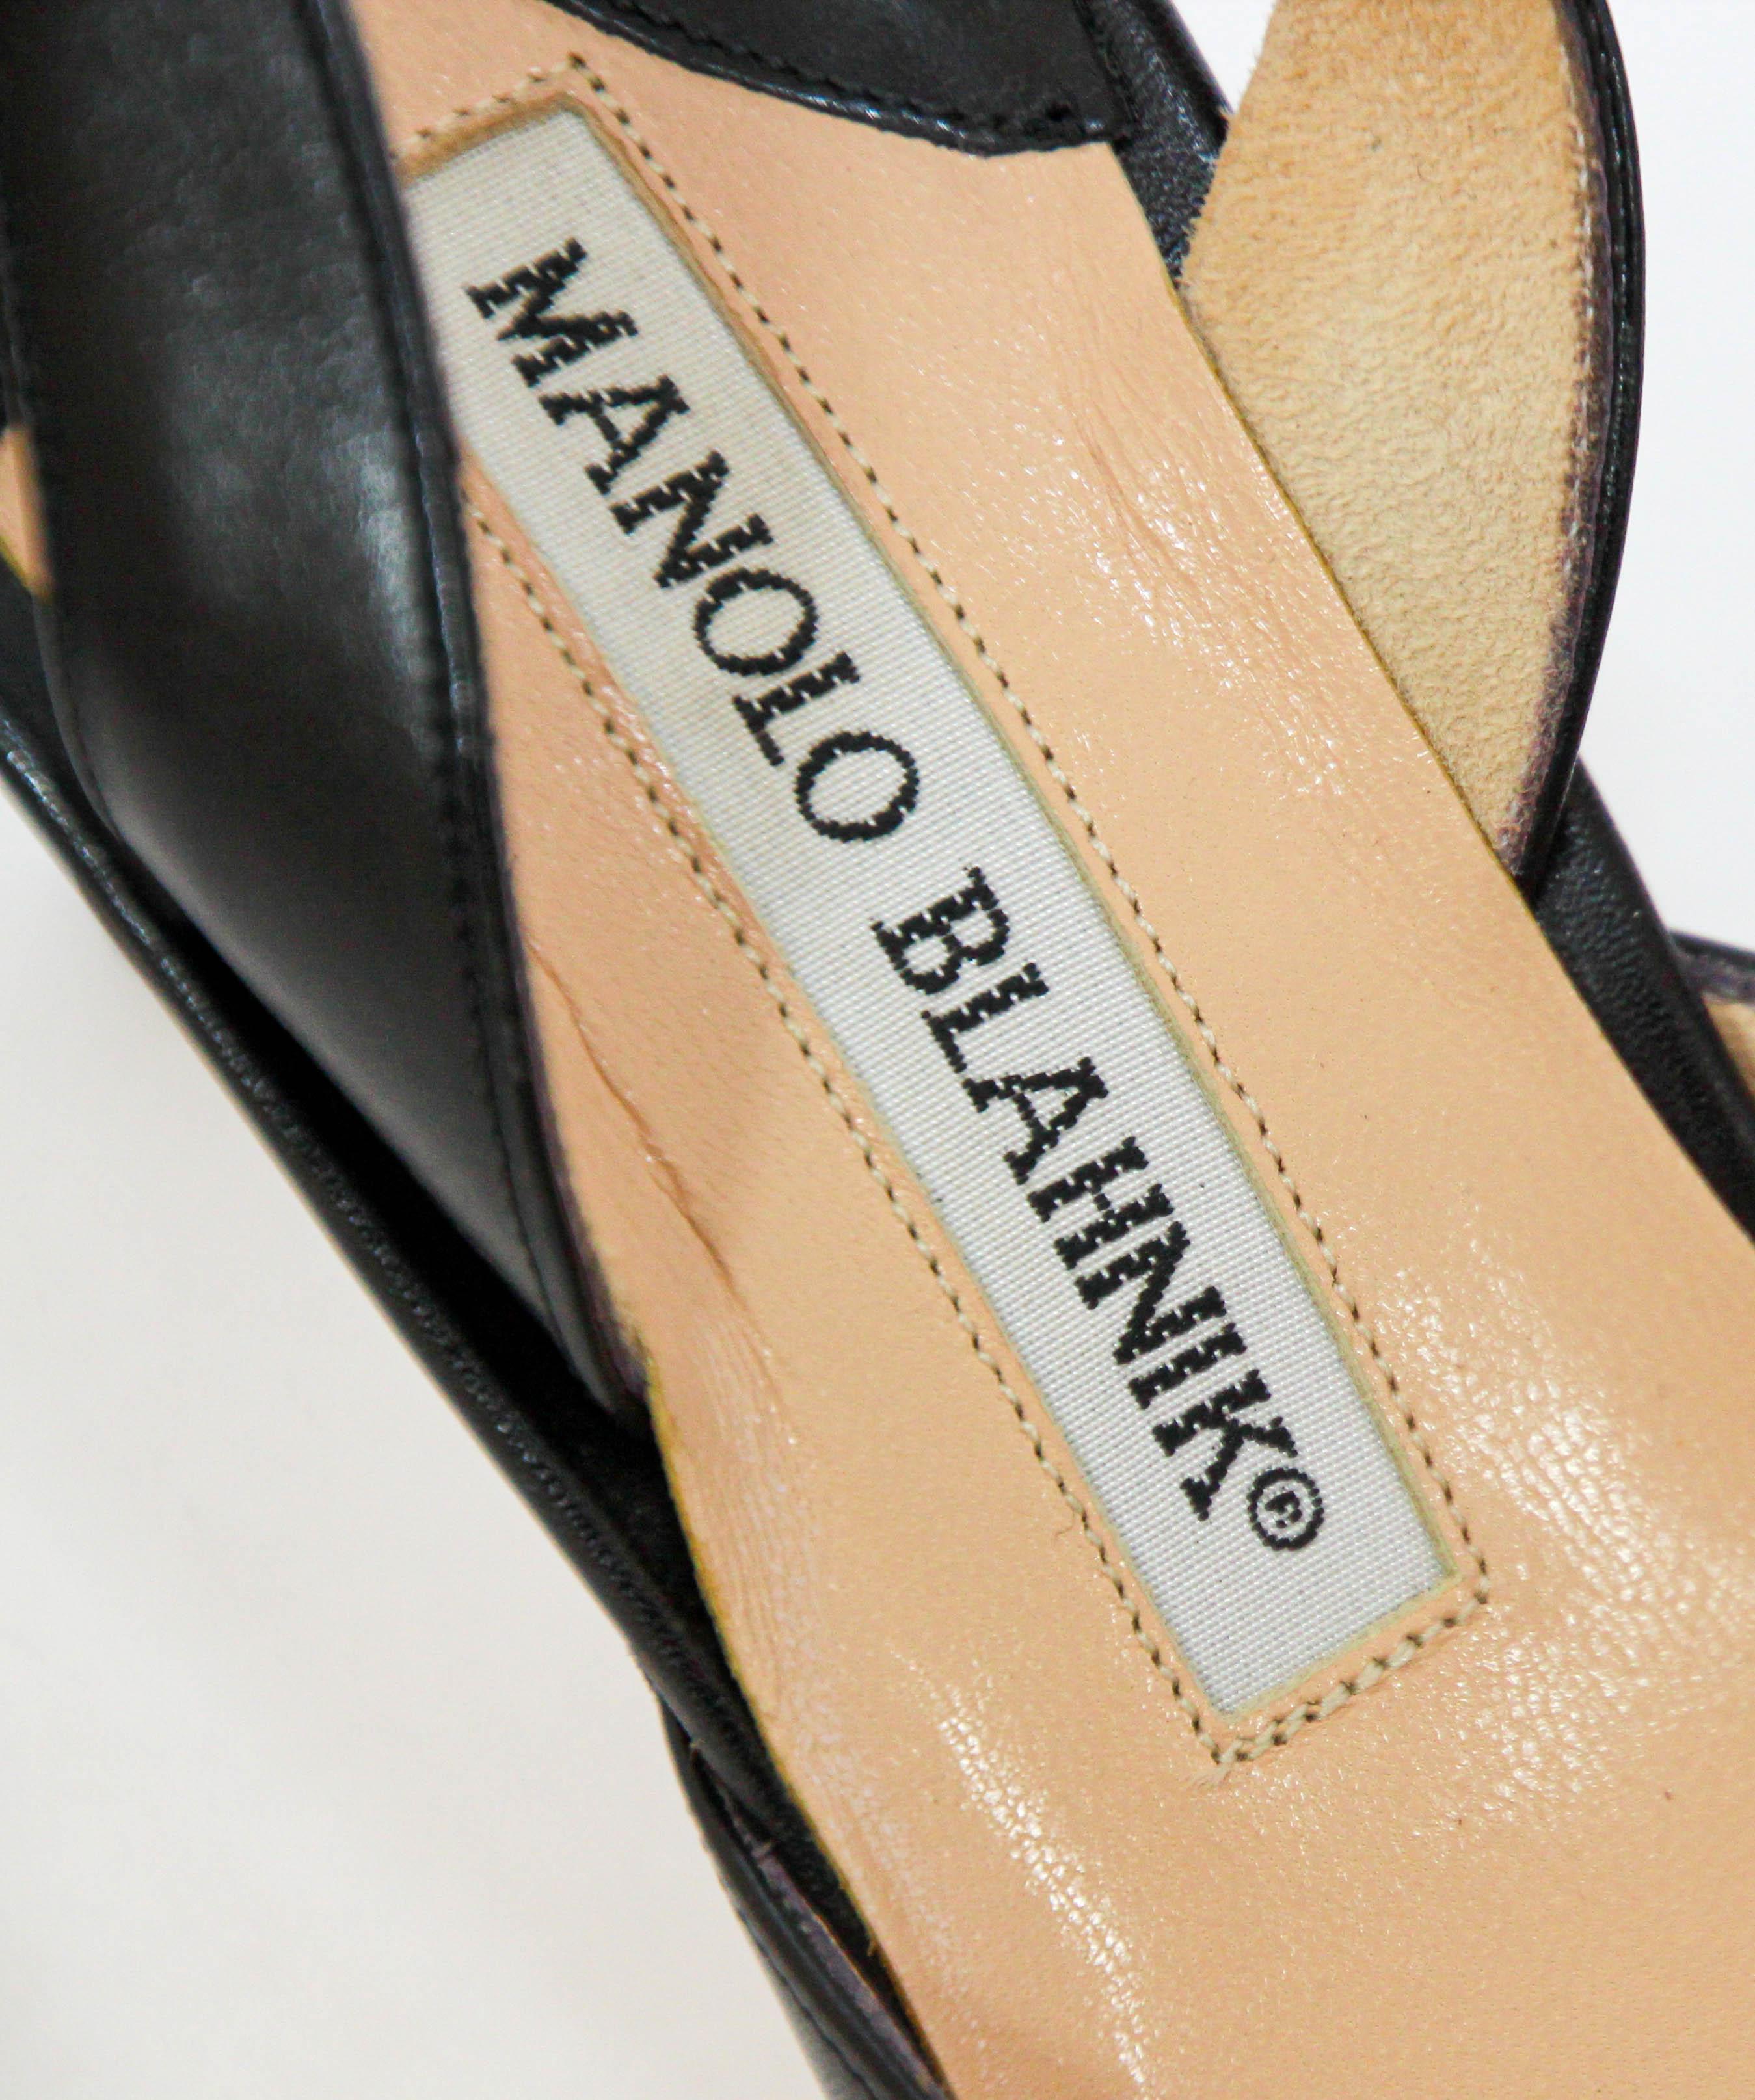 Manolo Blahnik Black Leather Slingback Pumps - Size 37 In Good Condition For Sale In North Hollywood, CA